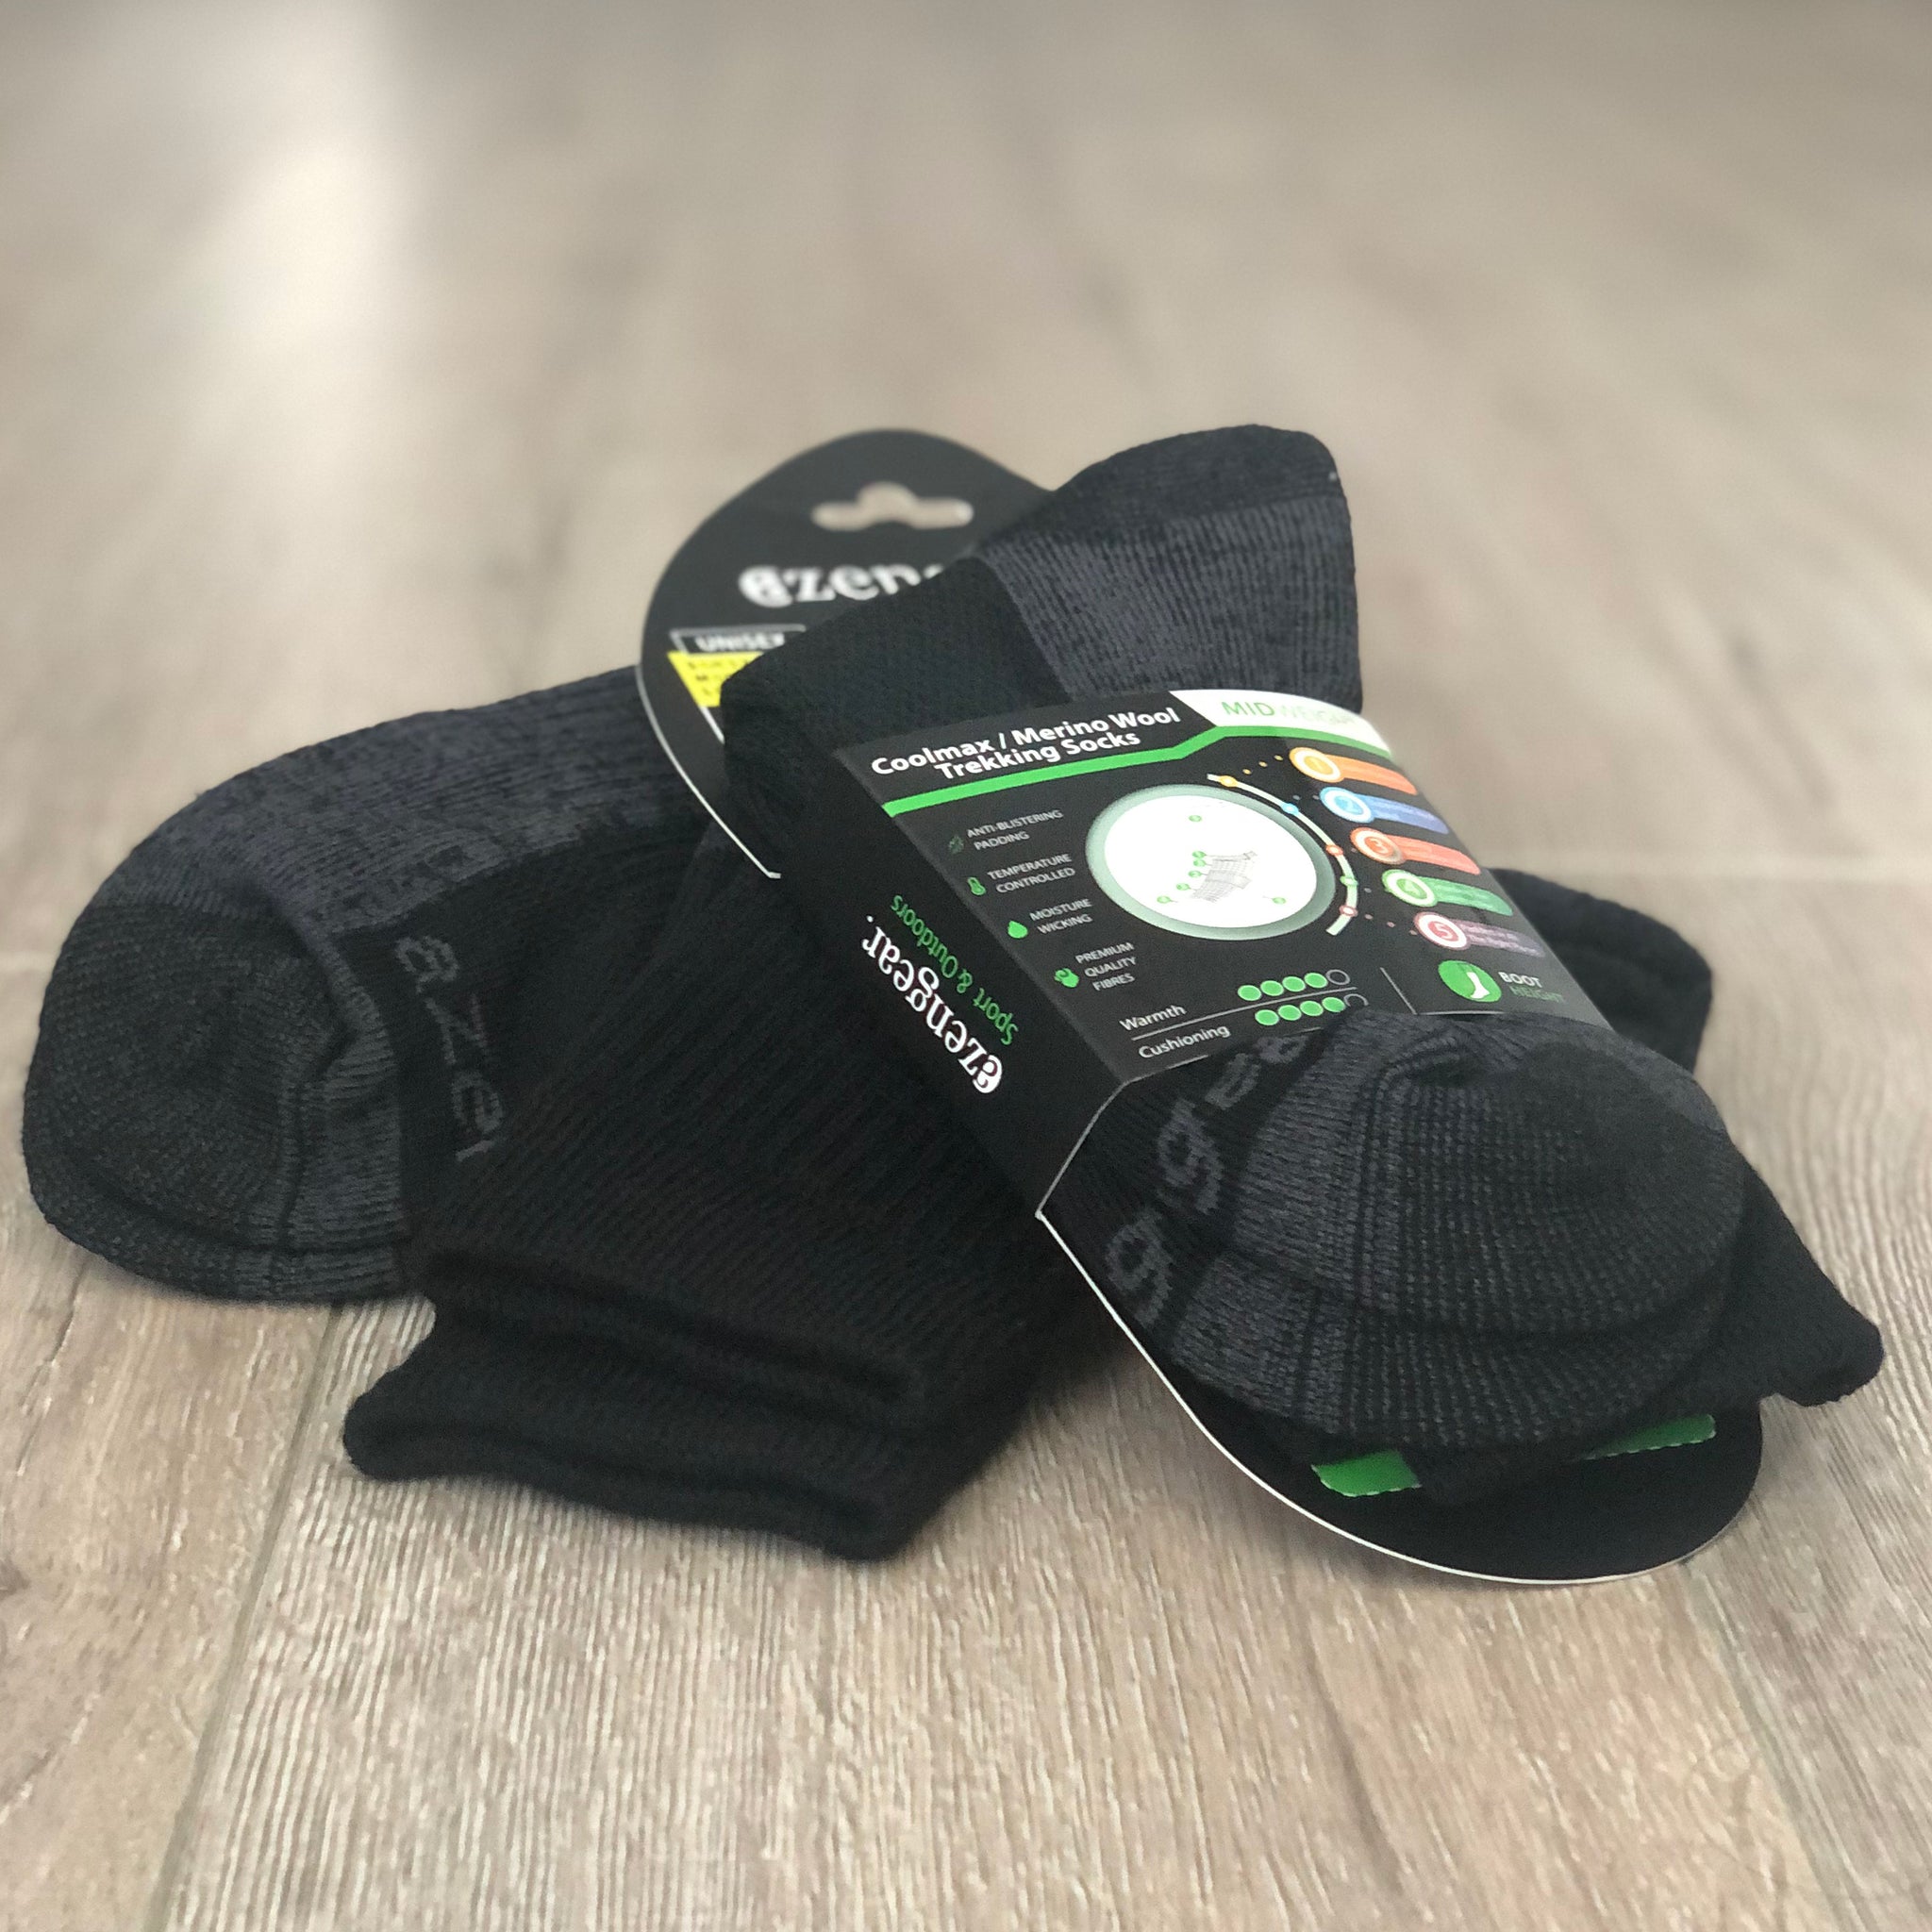 Coolmax functional socks for boots